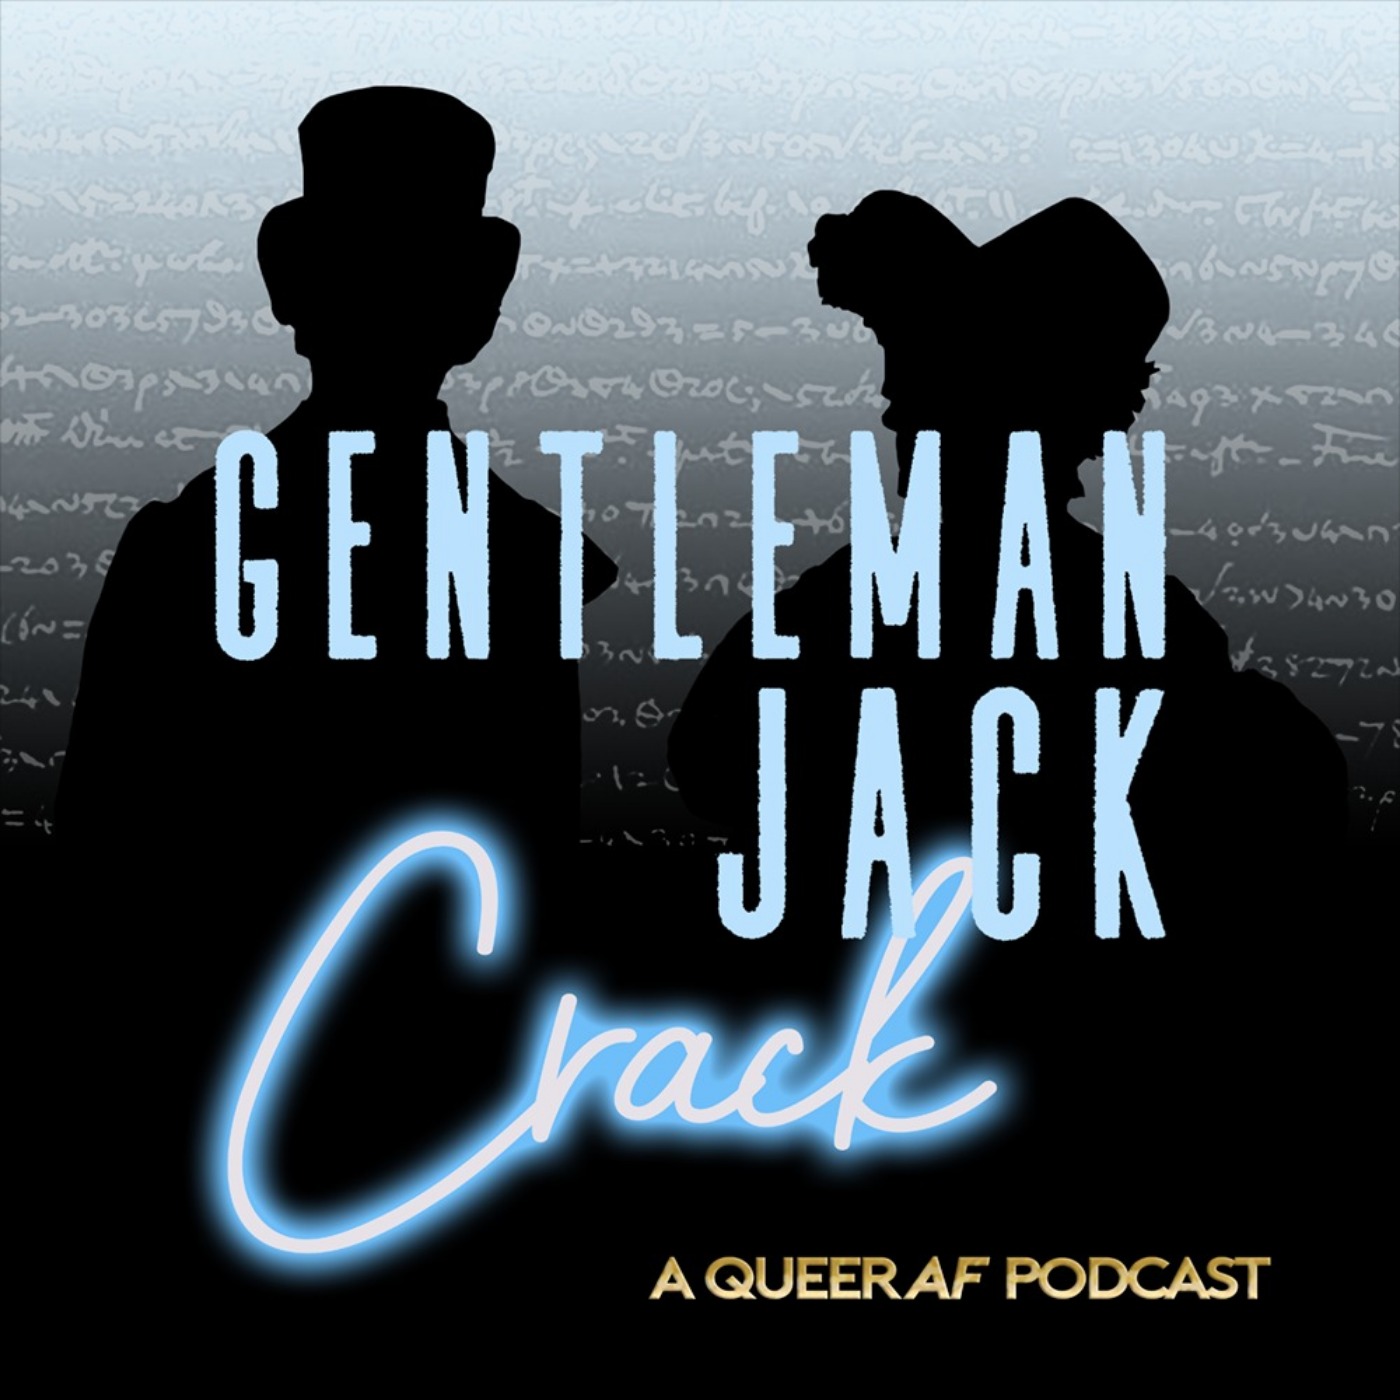 Gentleman Jack Crack - "Oh is That What You Call It?"